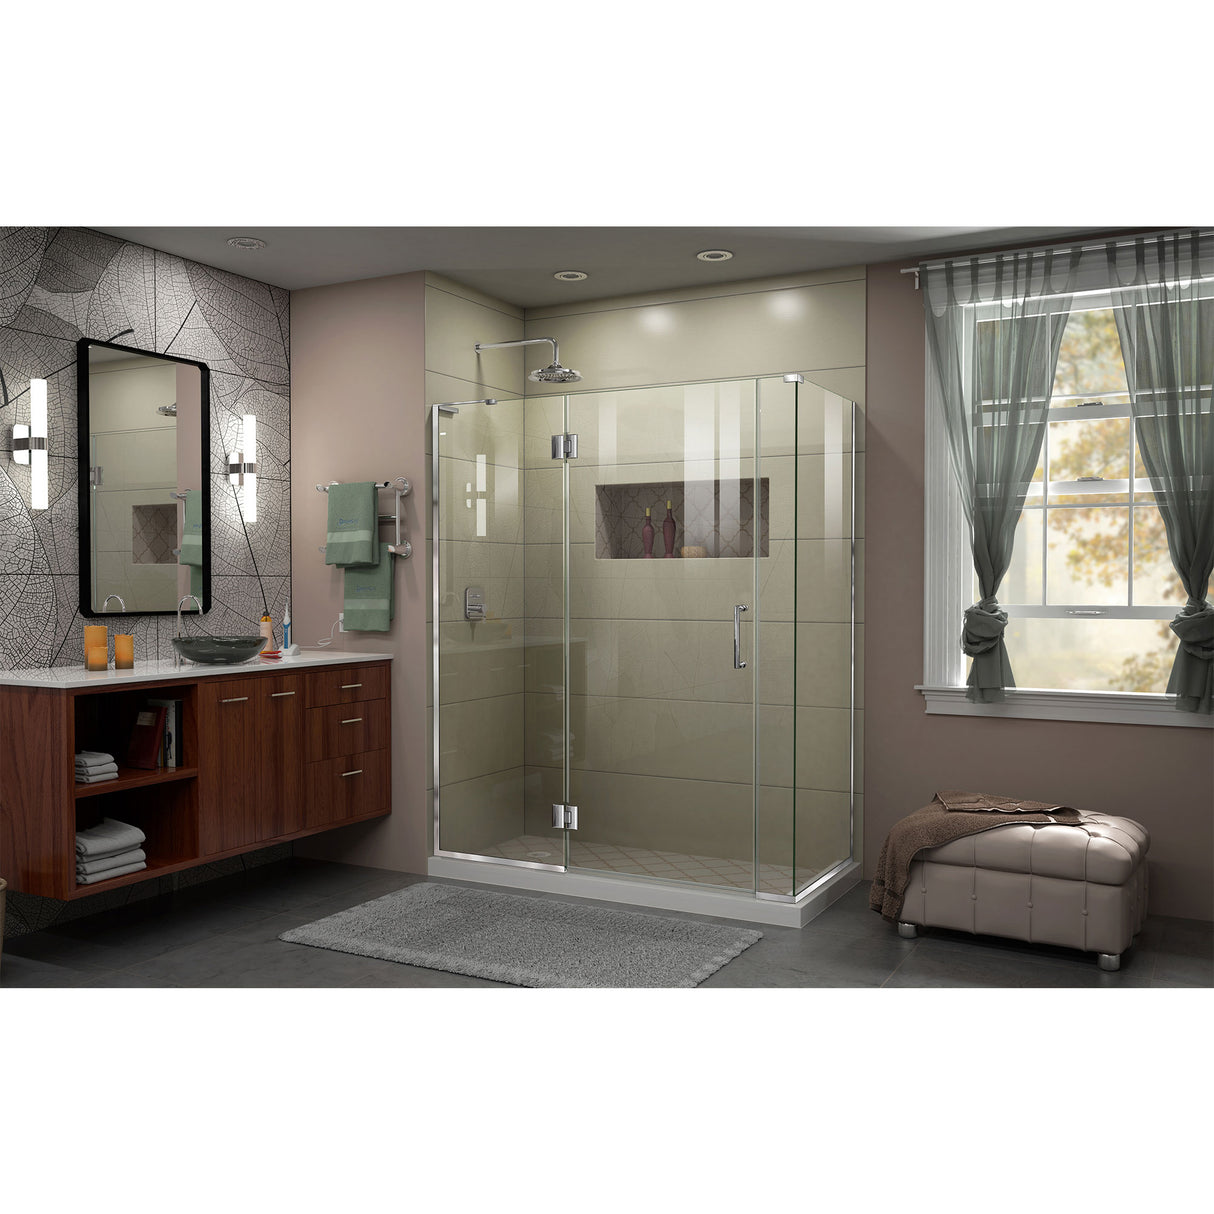 DreamLine Unidoor-X 58 1/2 in. W x 30 3/8 in. D x 72 in. H Frameless Hinged Shower Enclosure in Chrome